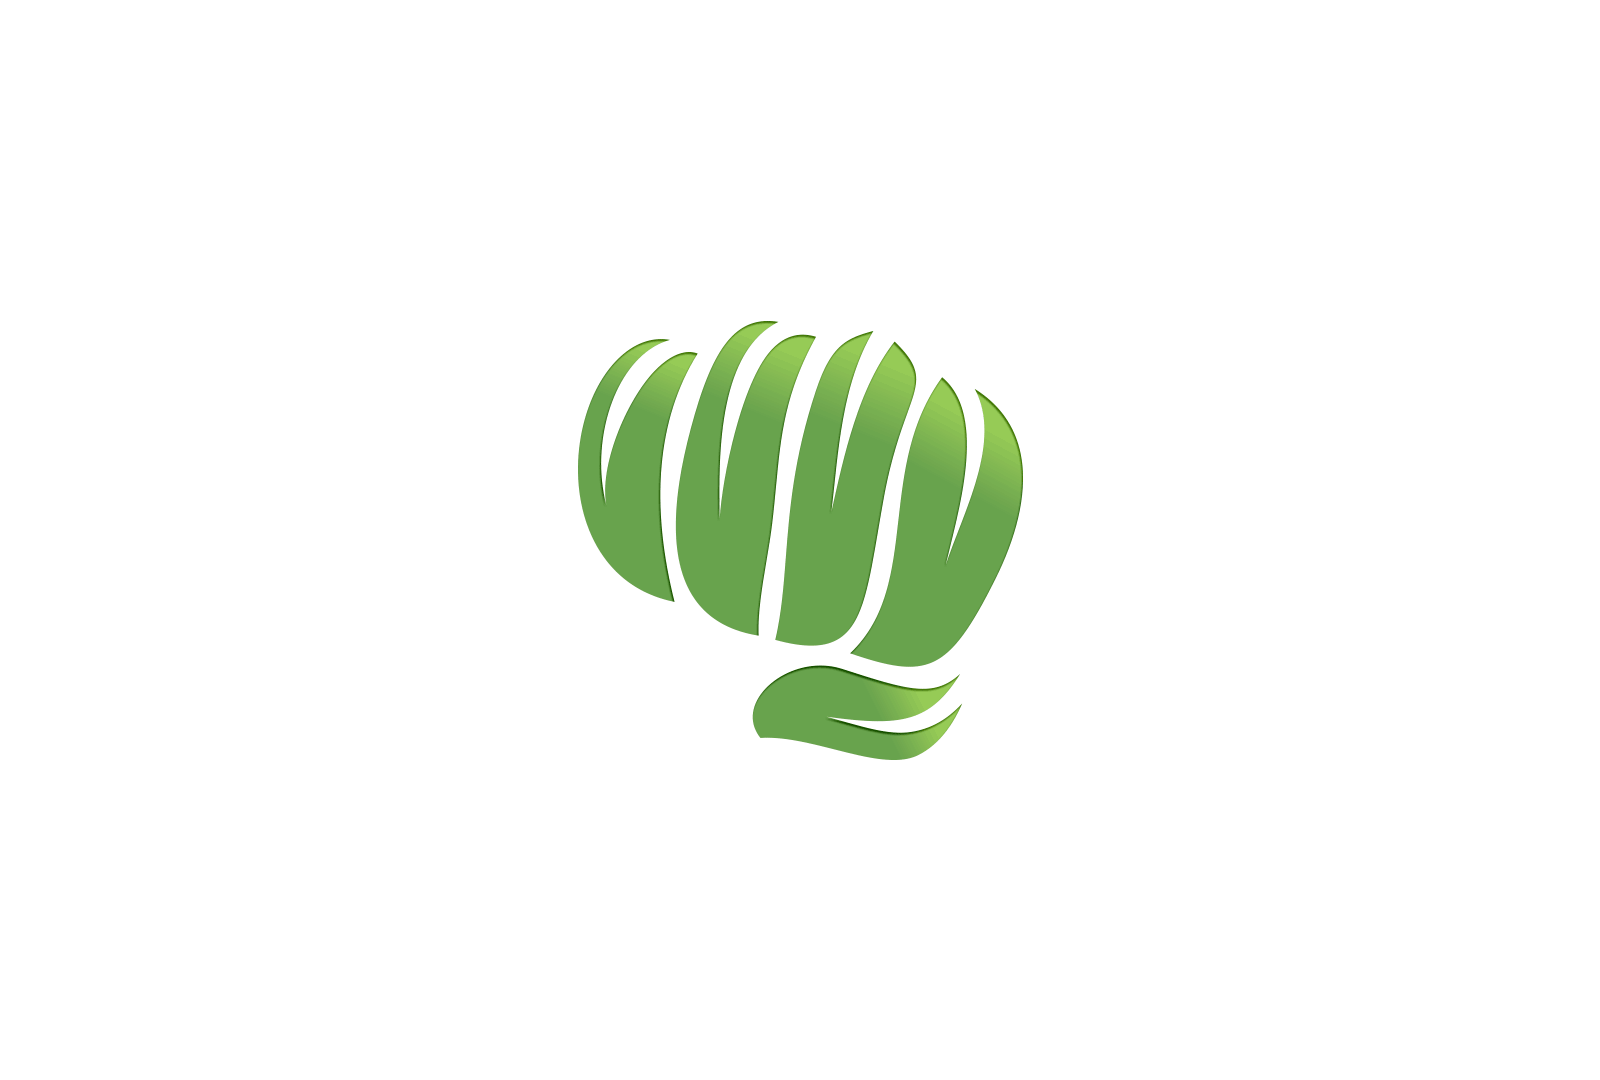 Green Fist Logo FOR SALE"